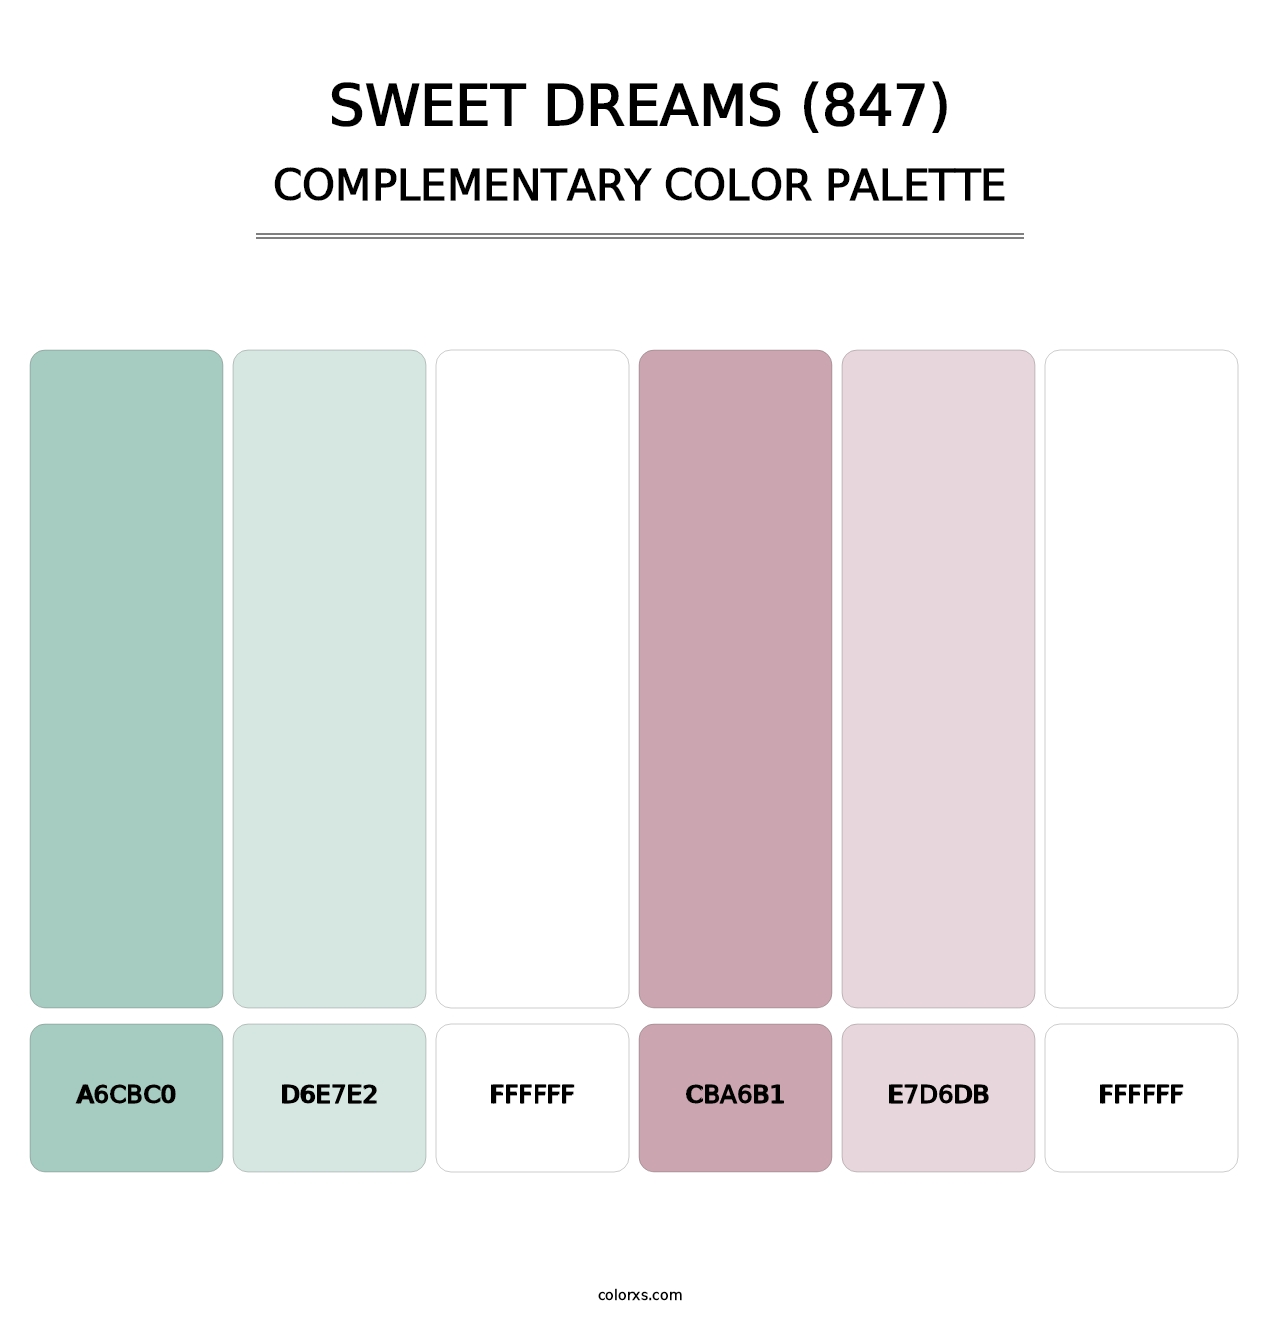 Sweet Dreams (847) - Complementary Color Palette